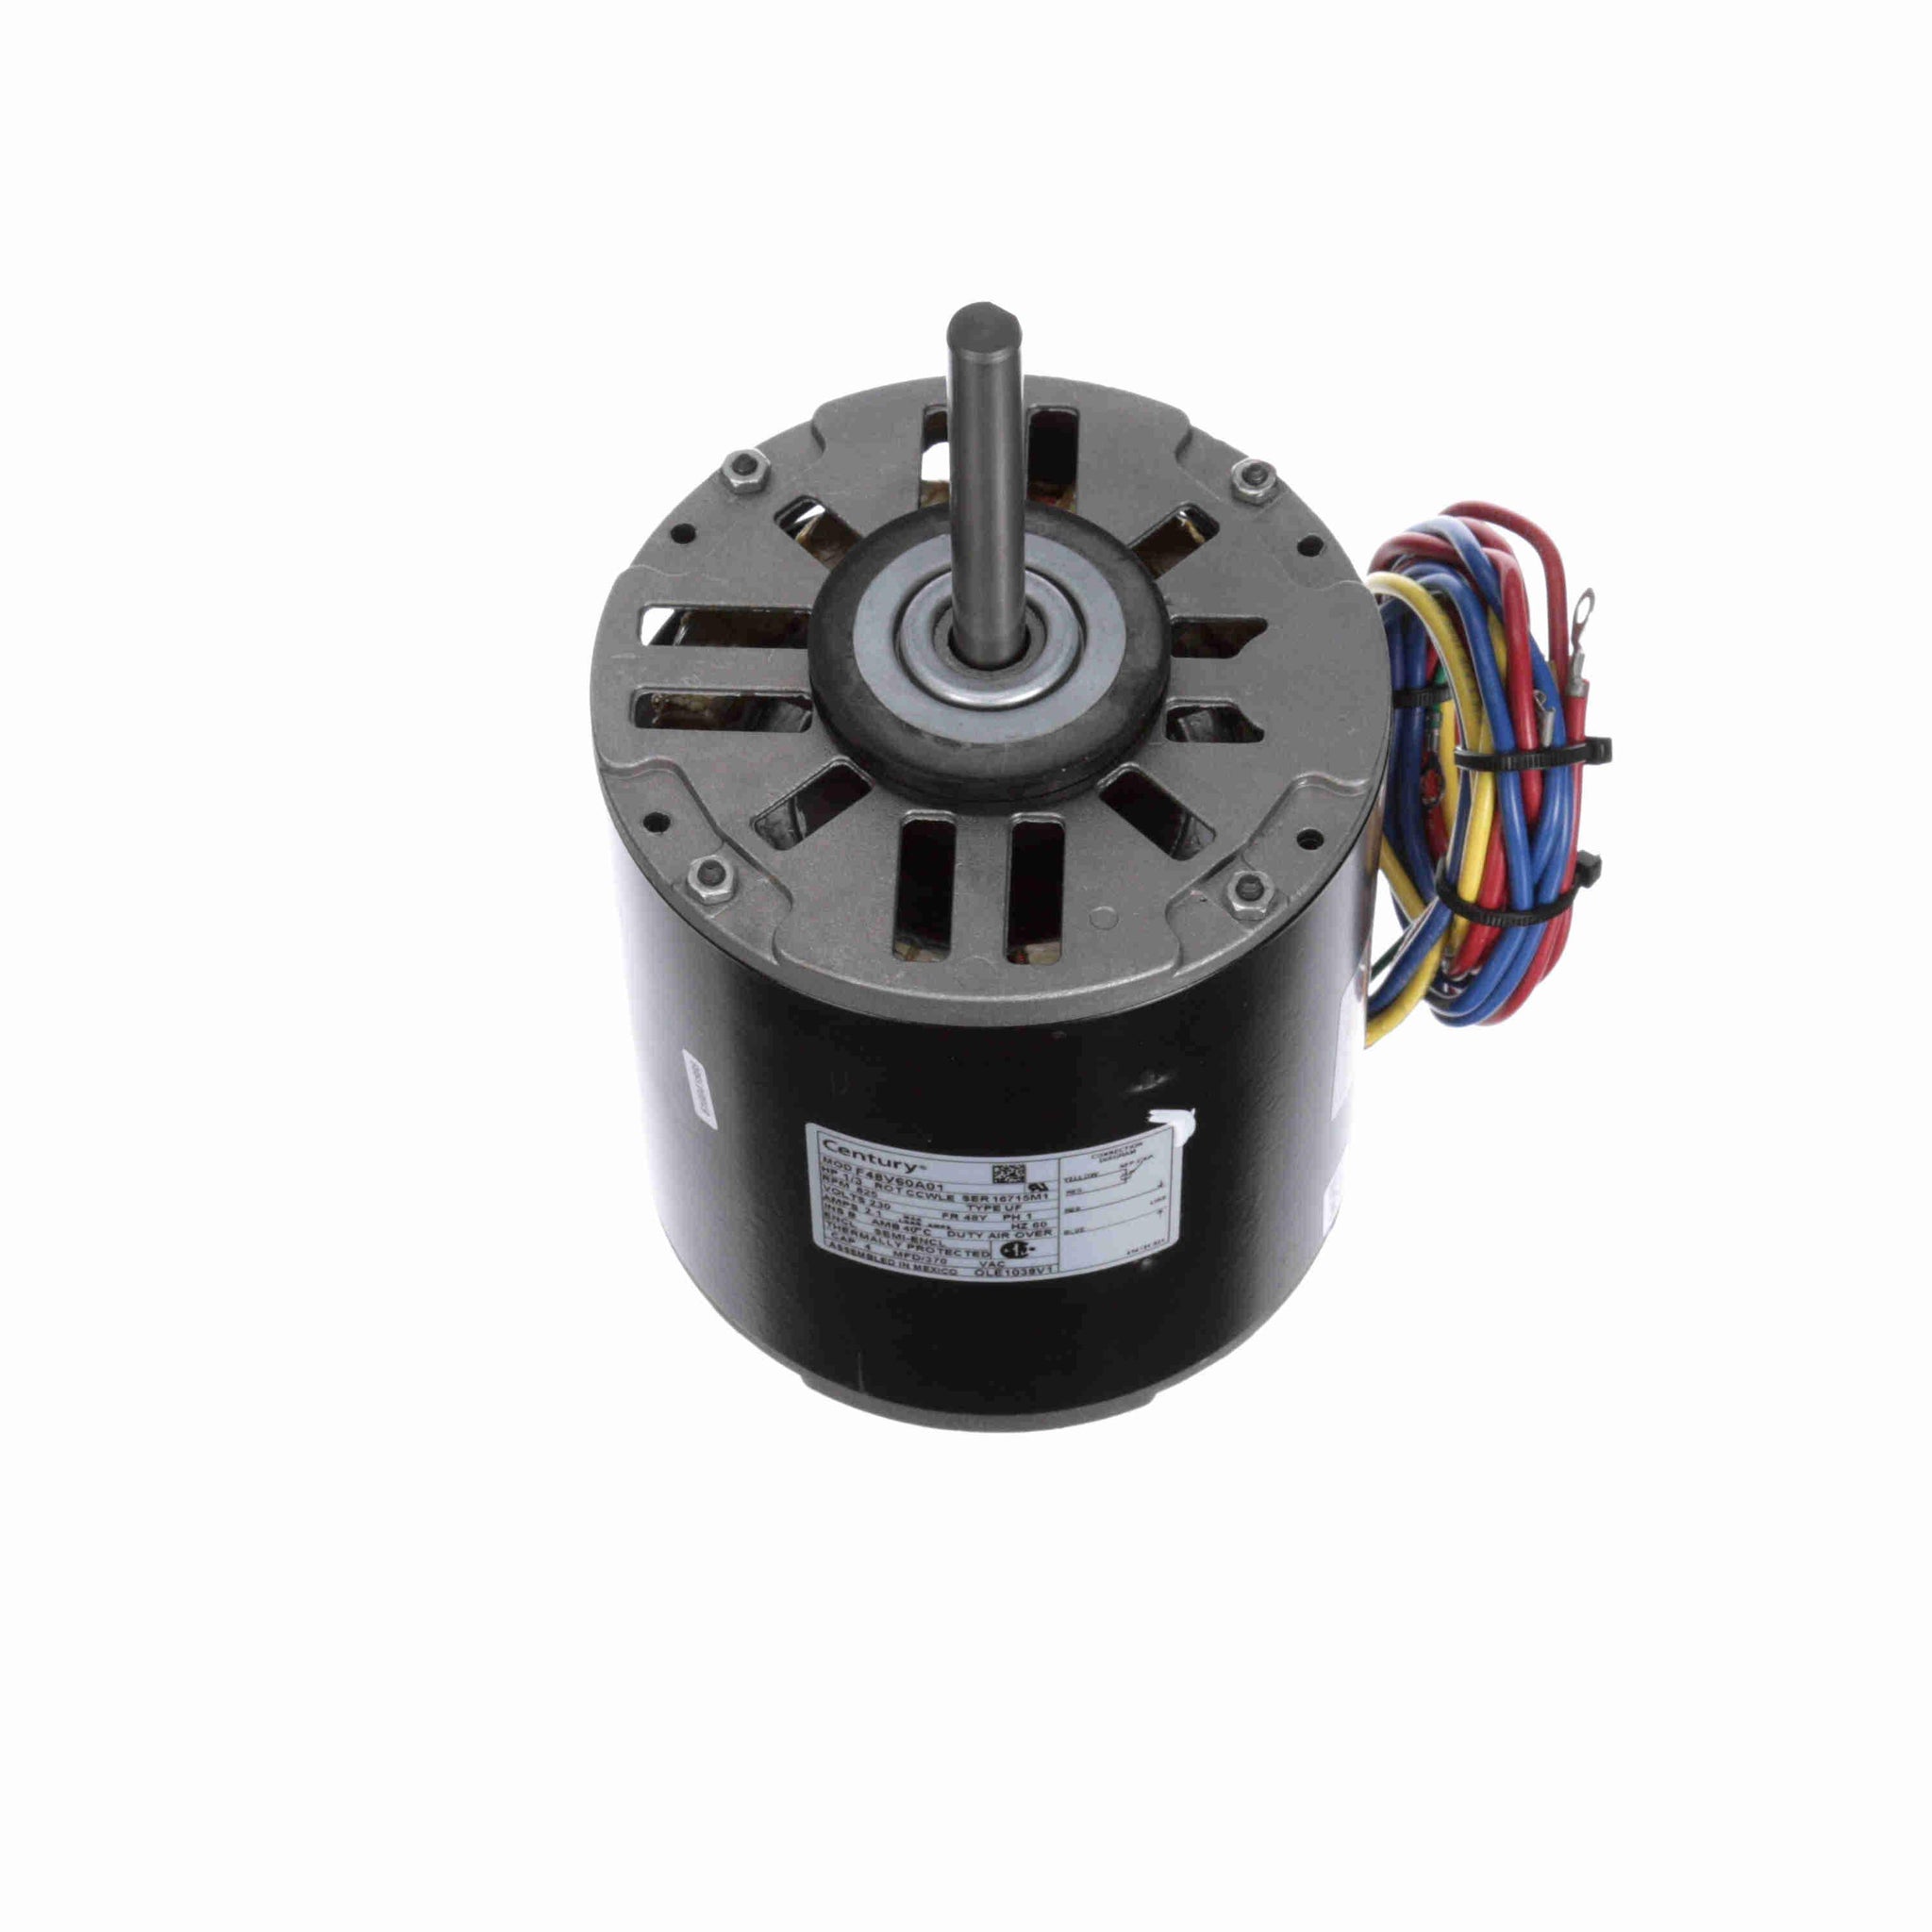 OLE1038V1 - 1/3 HP OEM Replacement Motor, 825 RPM, 230 Volts, 48 Frame, Semi Enclosed - Hardware & Moreee